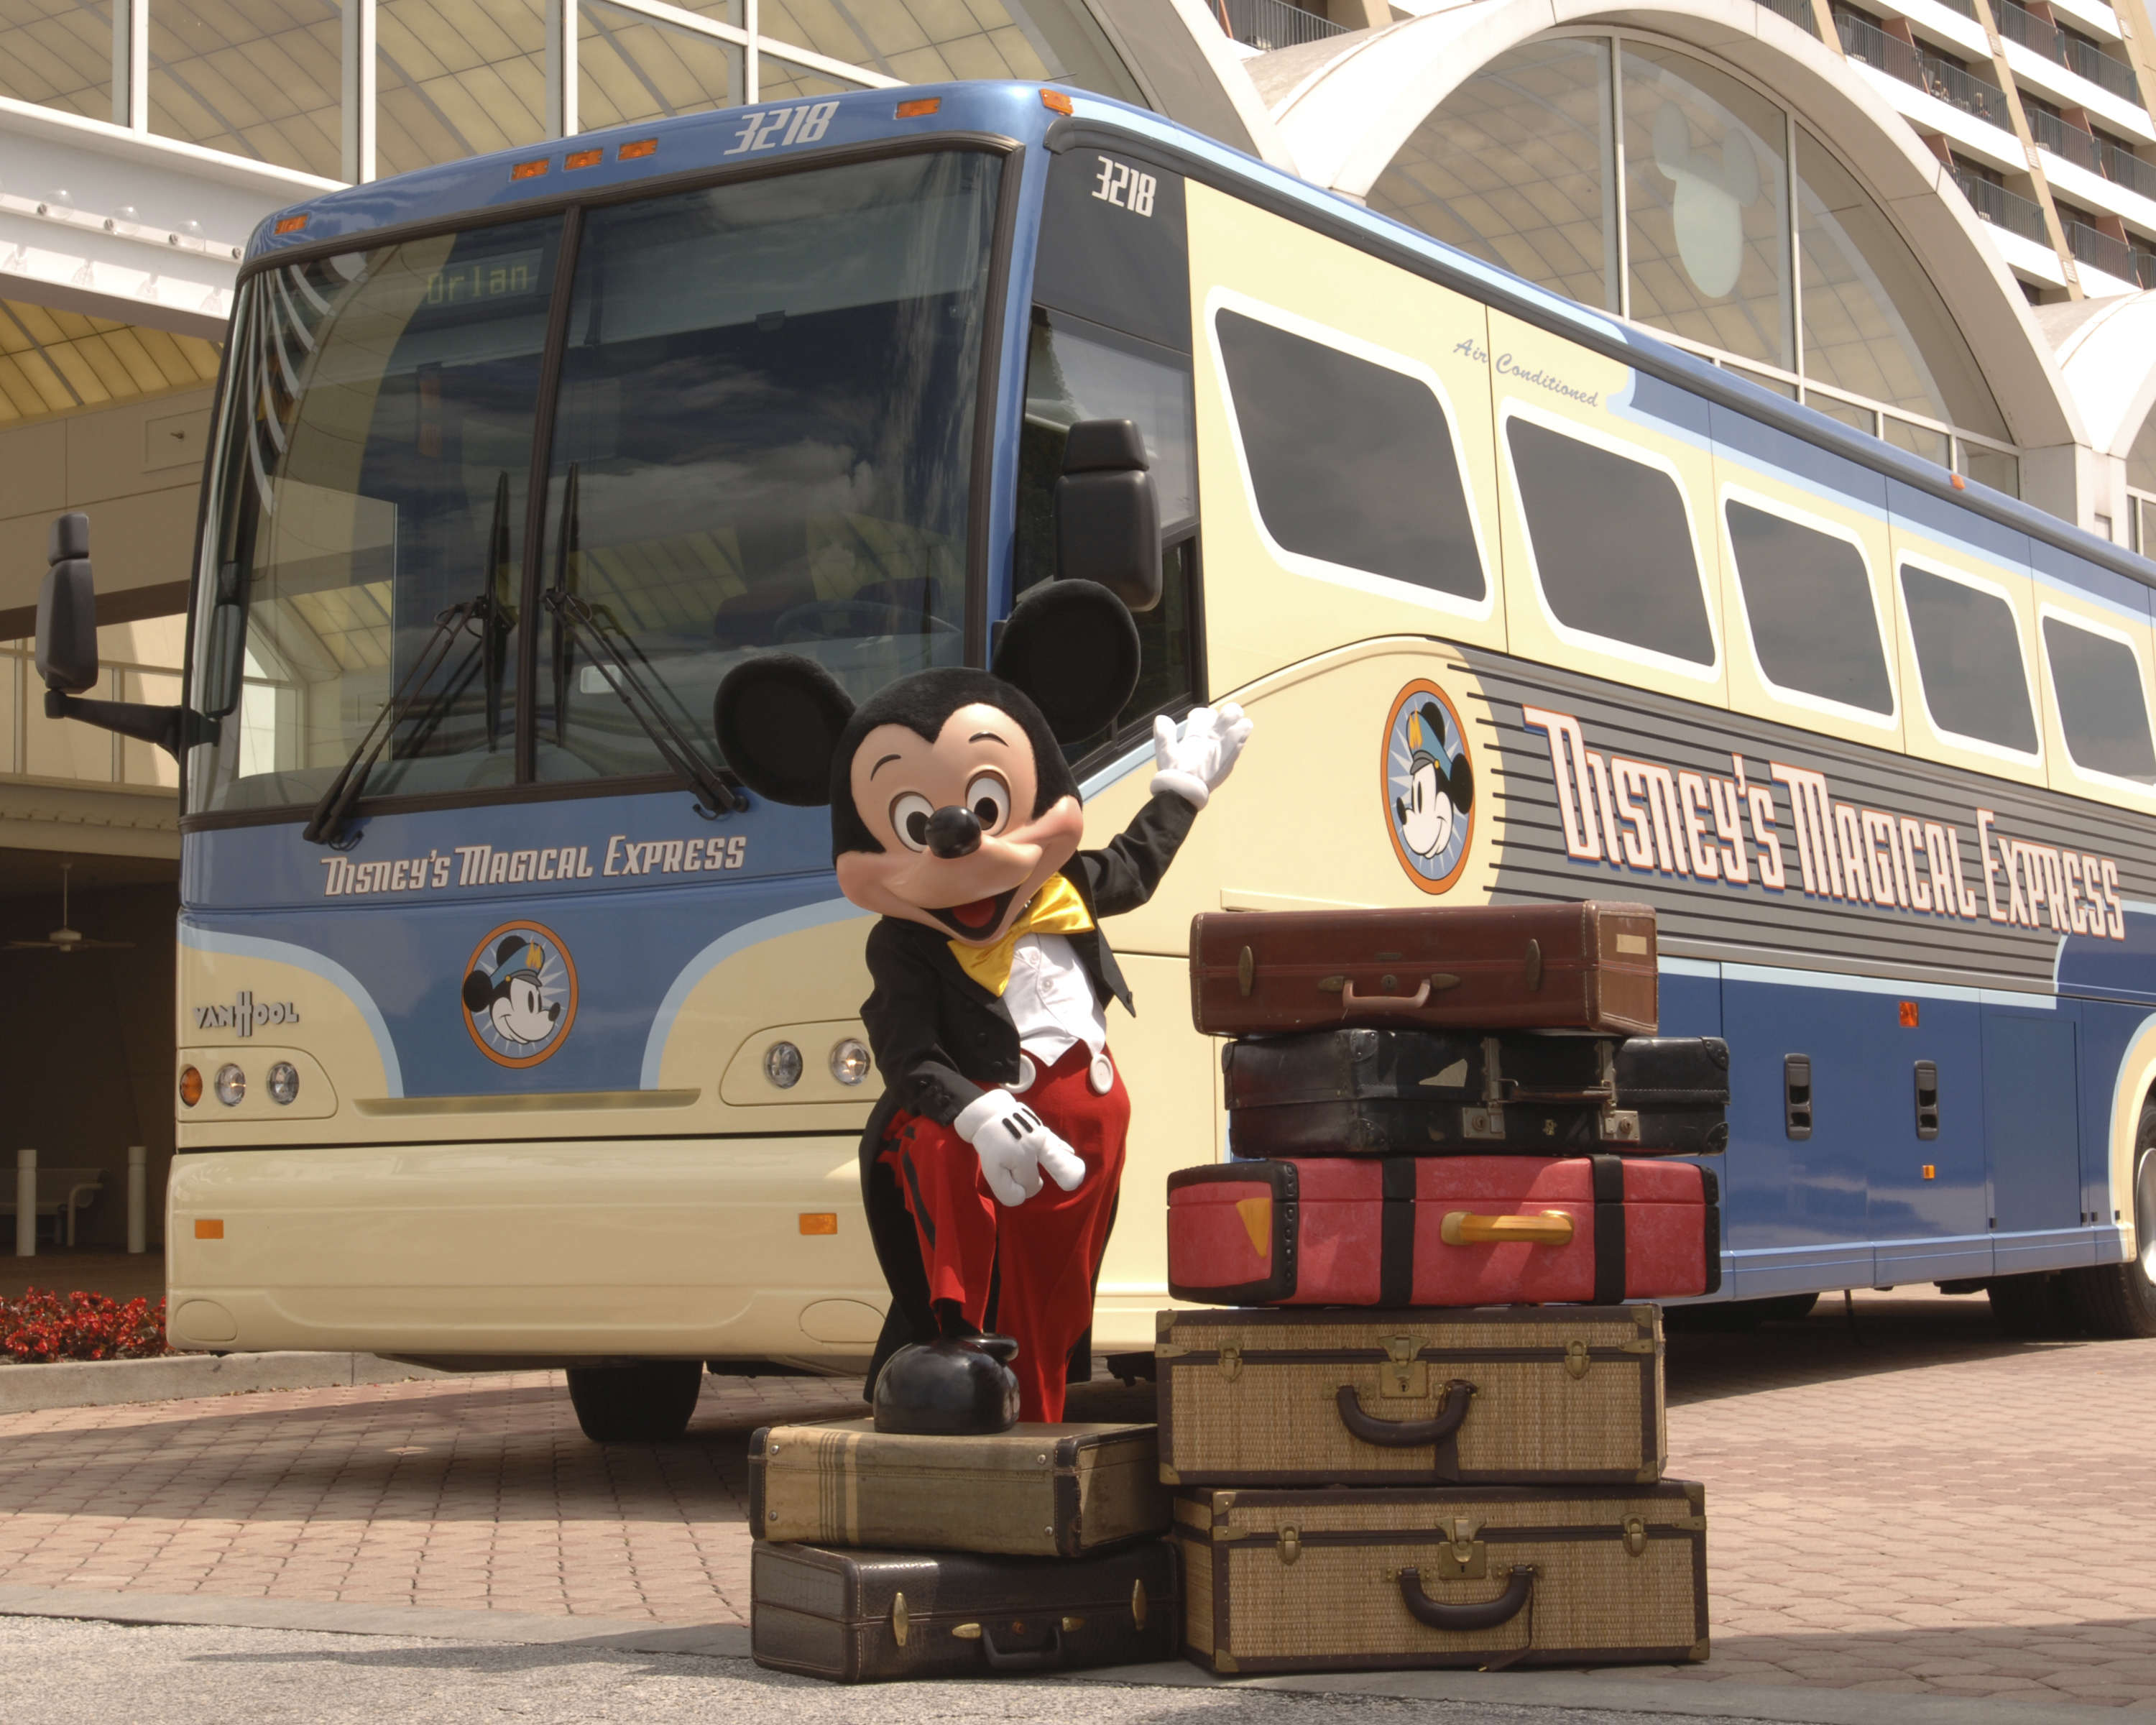 Mickey Mouse standing in front of Disney's Magical Express bus